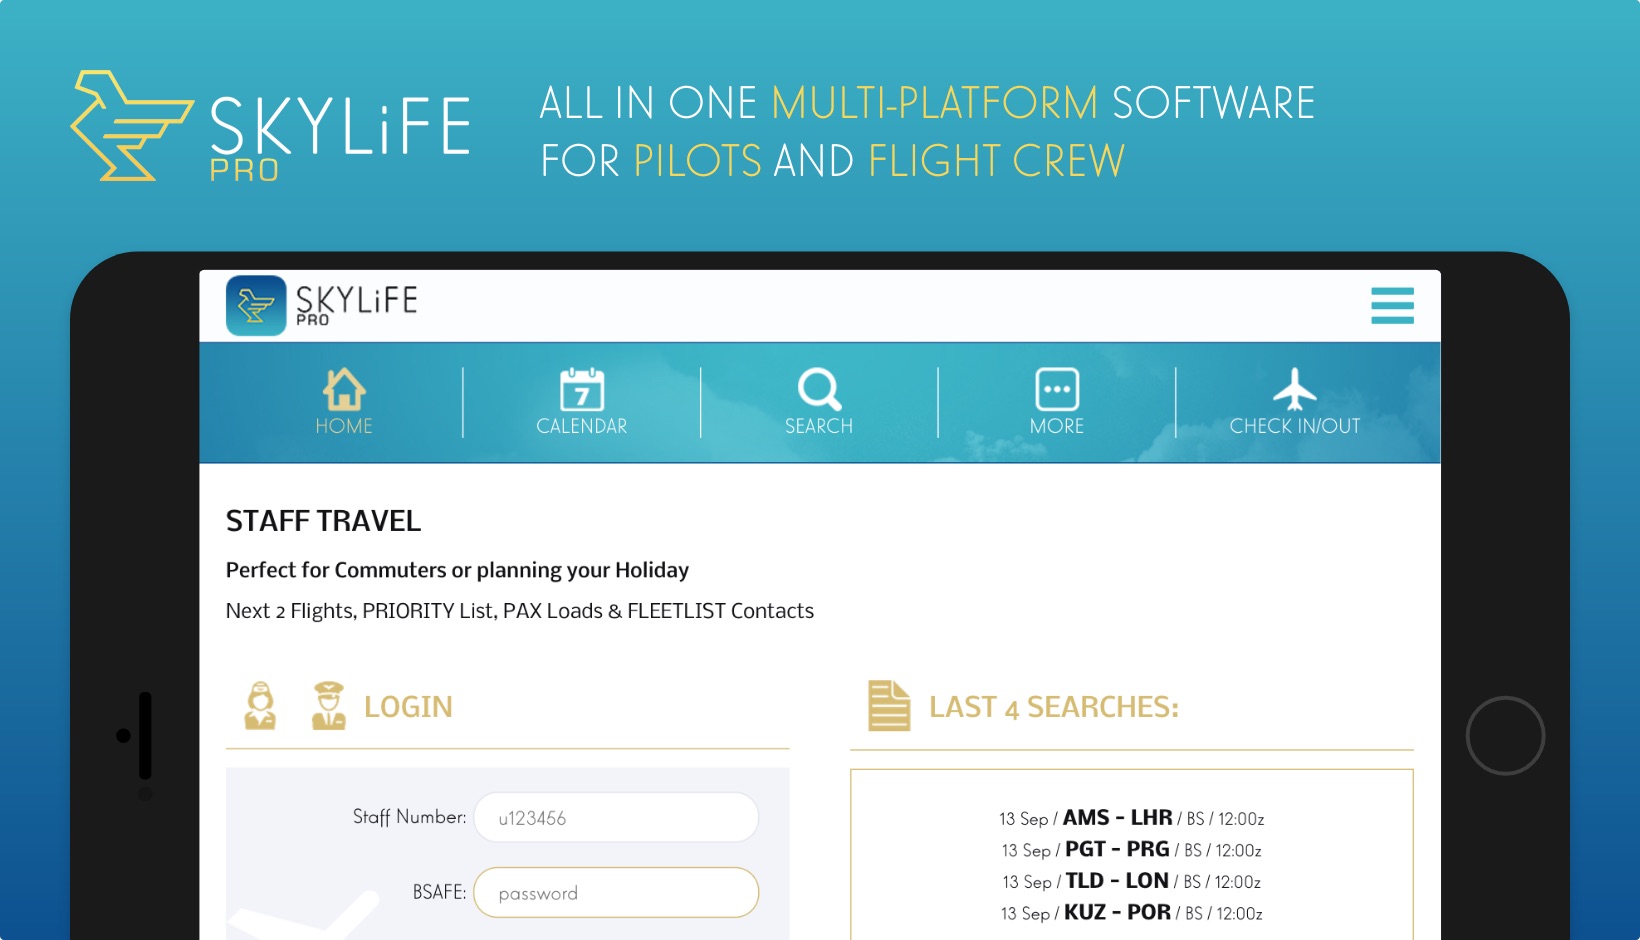 Skylife Pro - all in one software for pilots and flight crew